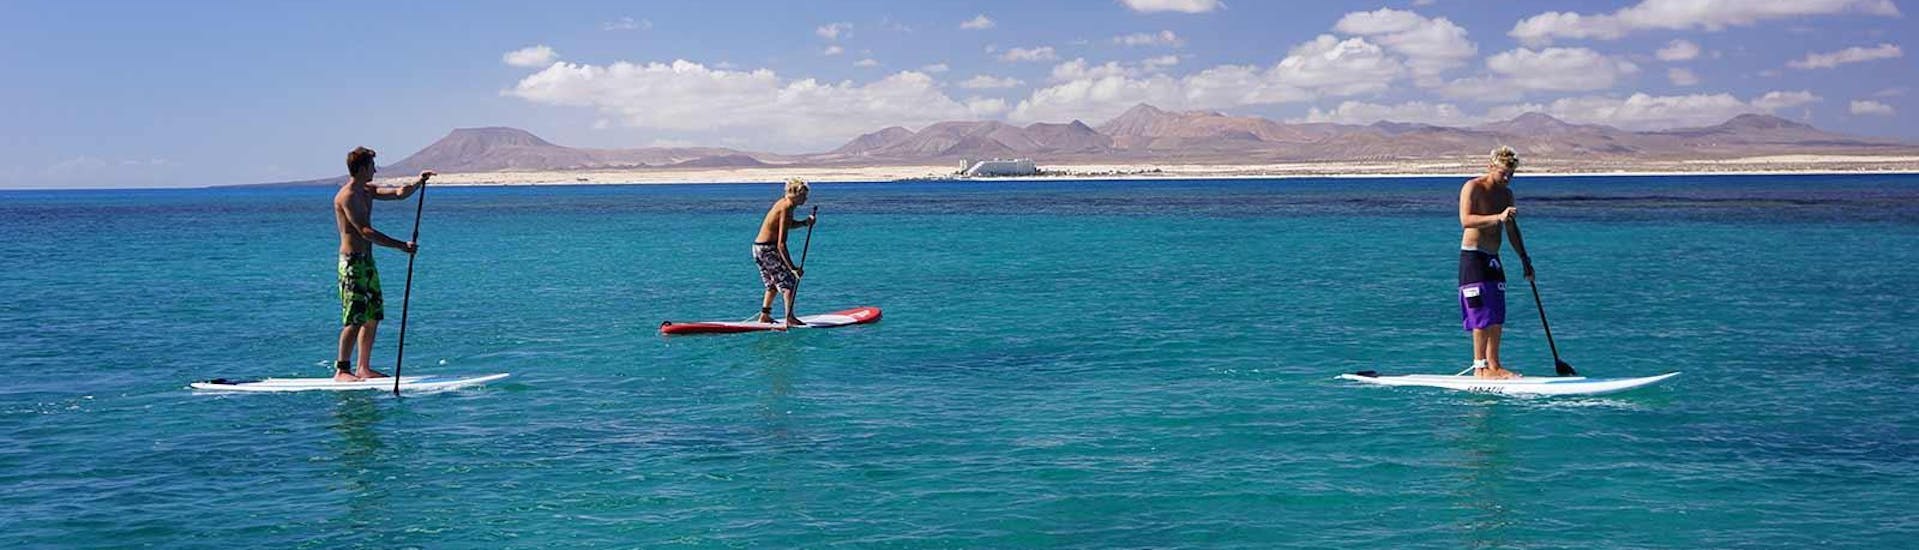 Stand Up Paddle Tour voor alle niveaus.